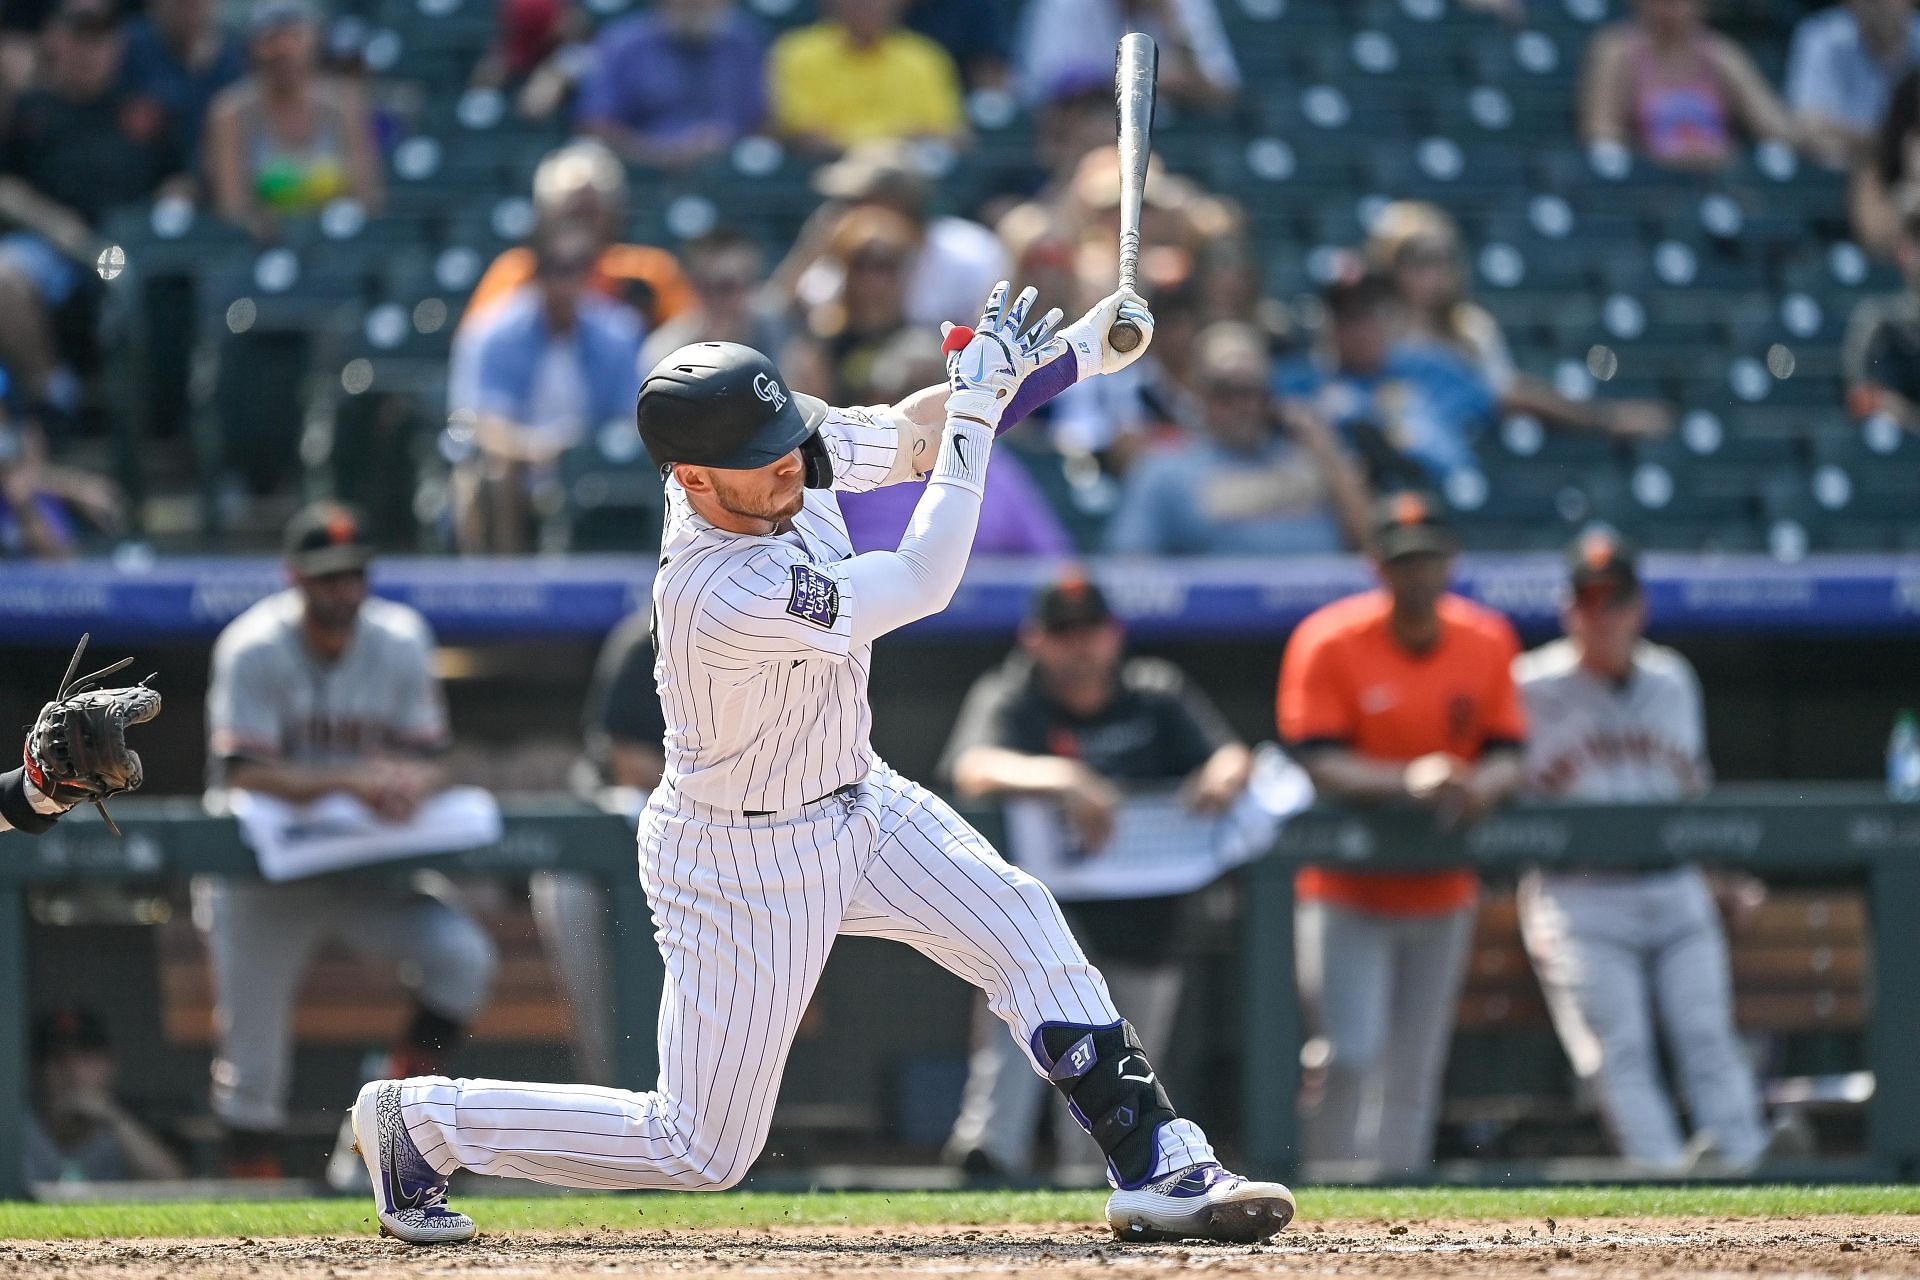 To recruit Trevor Story, former Boston Red Sox third baseman executed a ...